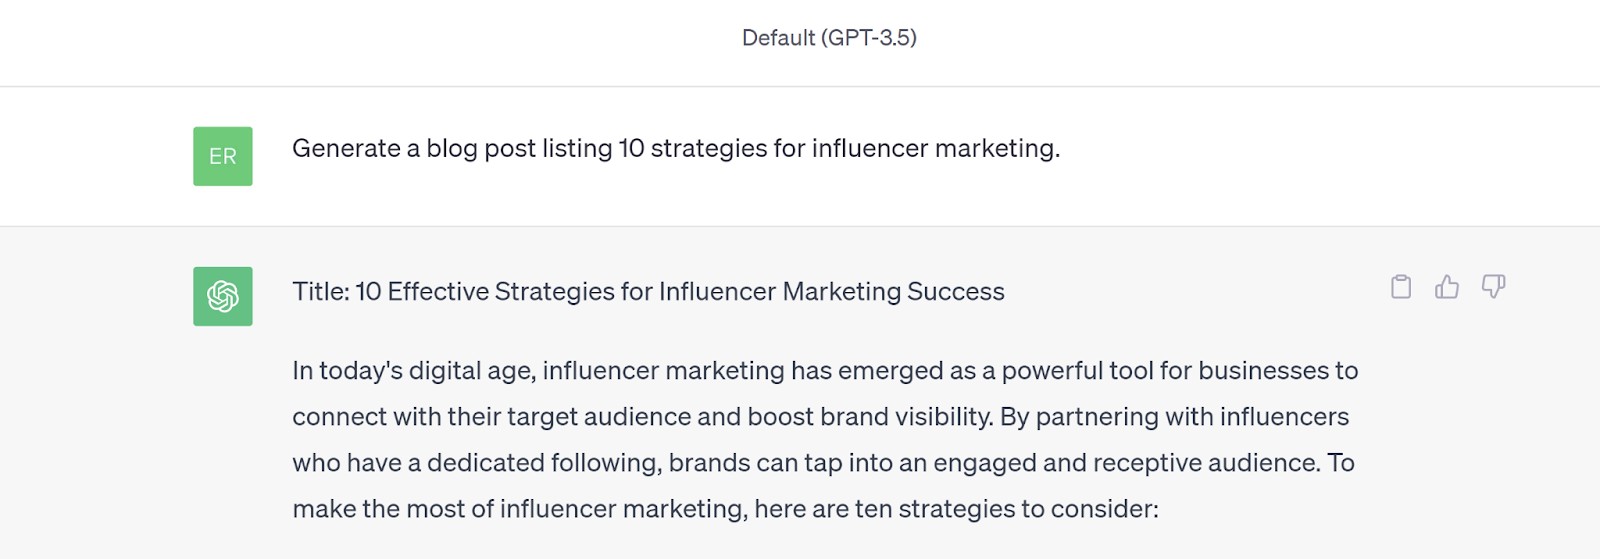 ChatGPTs draft reads "Title: 10 Effective Strategies for Influencer Marketing Success  In today's digital age, influencer marketing has emerged as a powerful tool for businesses to connect with their target audience and boost brand visibility. By partnering with influencers who have a dedicated following, brands can tap into an engaged and receptive audience. To make the most of influencer marketing, here are ten strategies to consider:"; AI copywriting tools